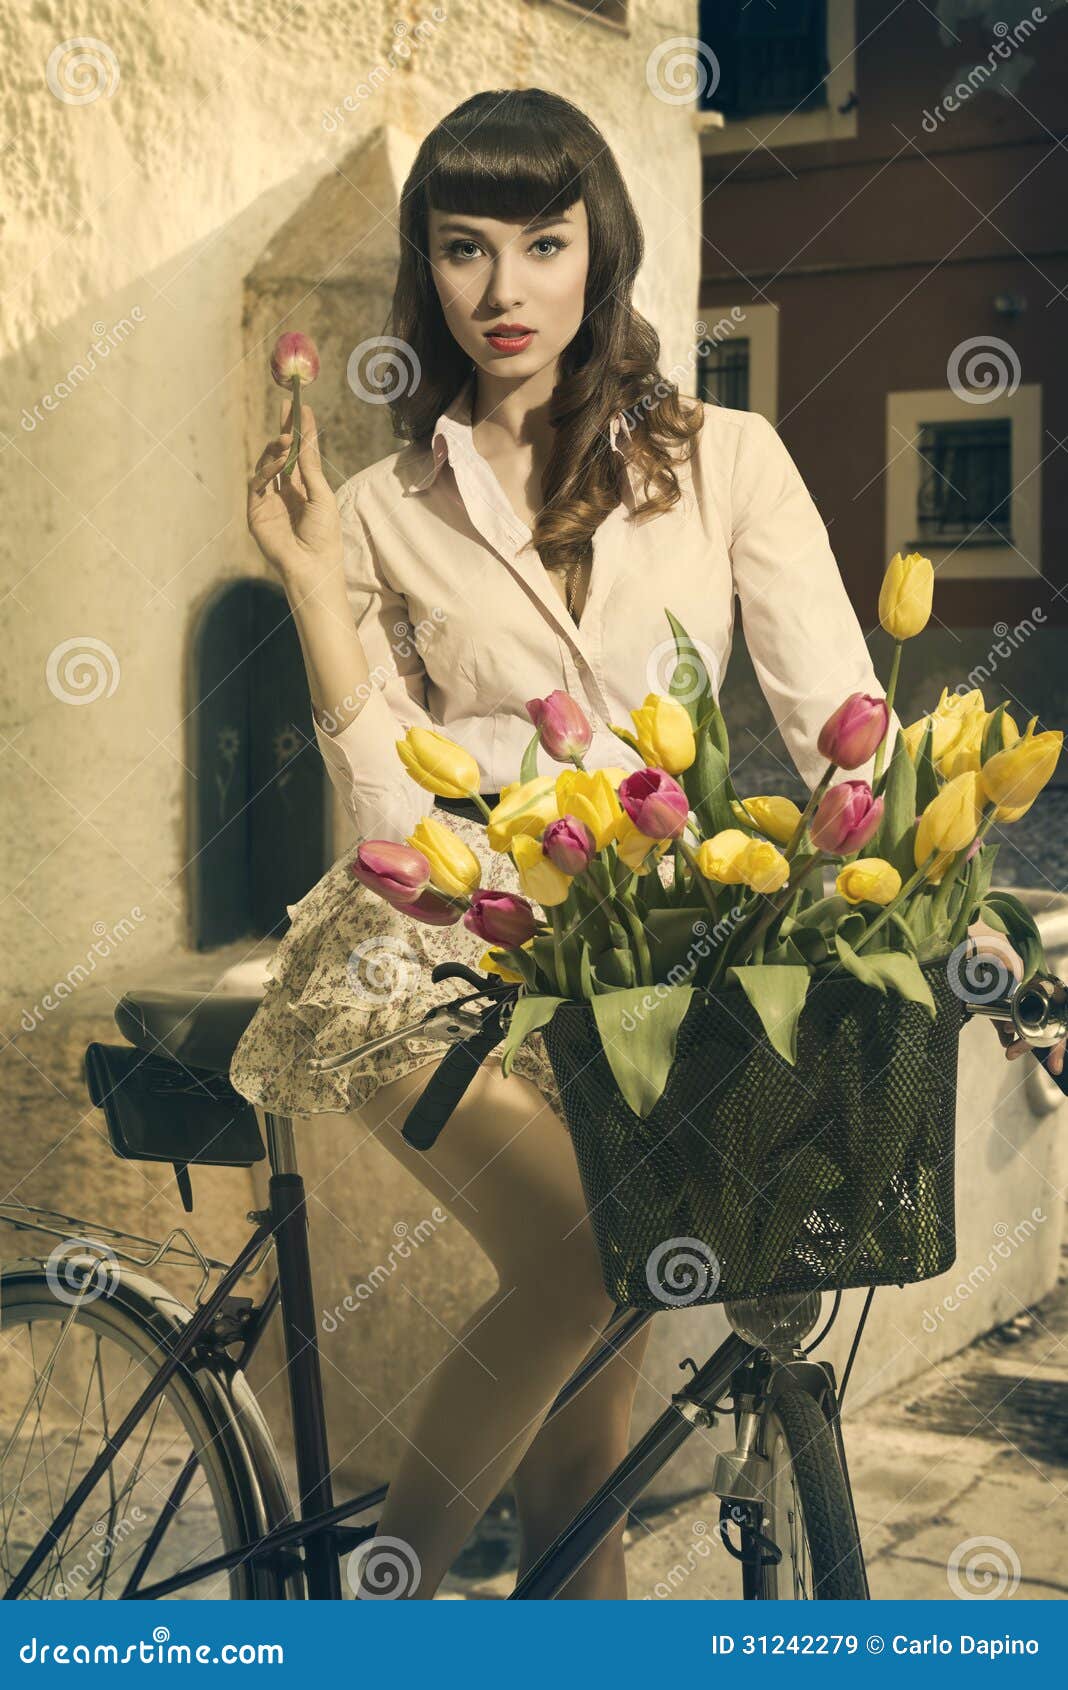 Retro Pin Up On Bike In Old Town With Tulips Royalty Free Stock Images Image 31242279